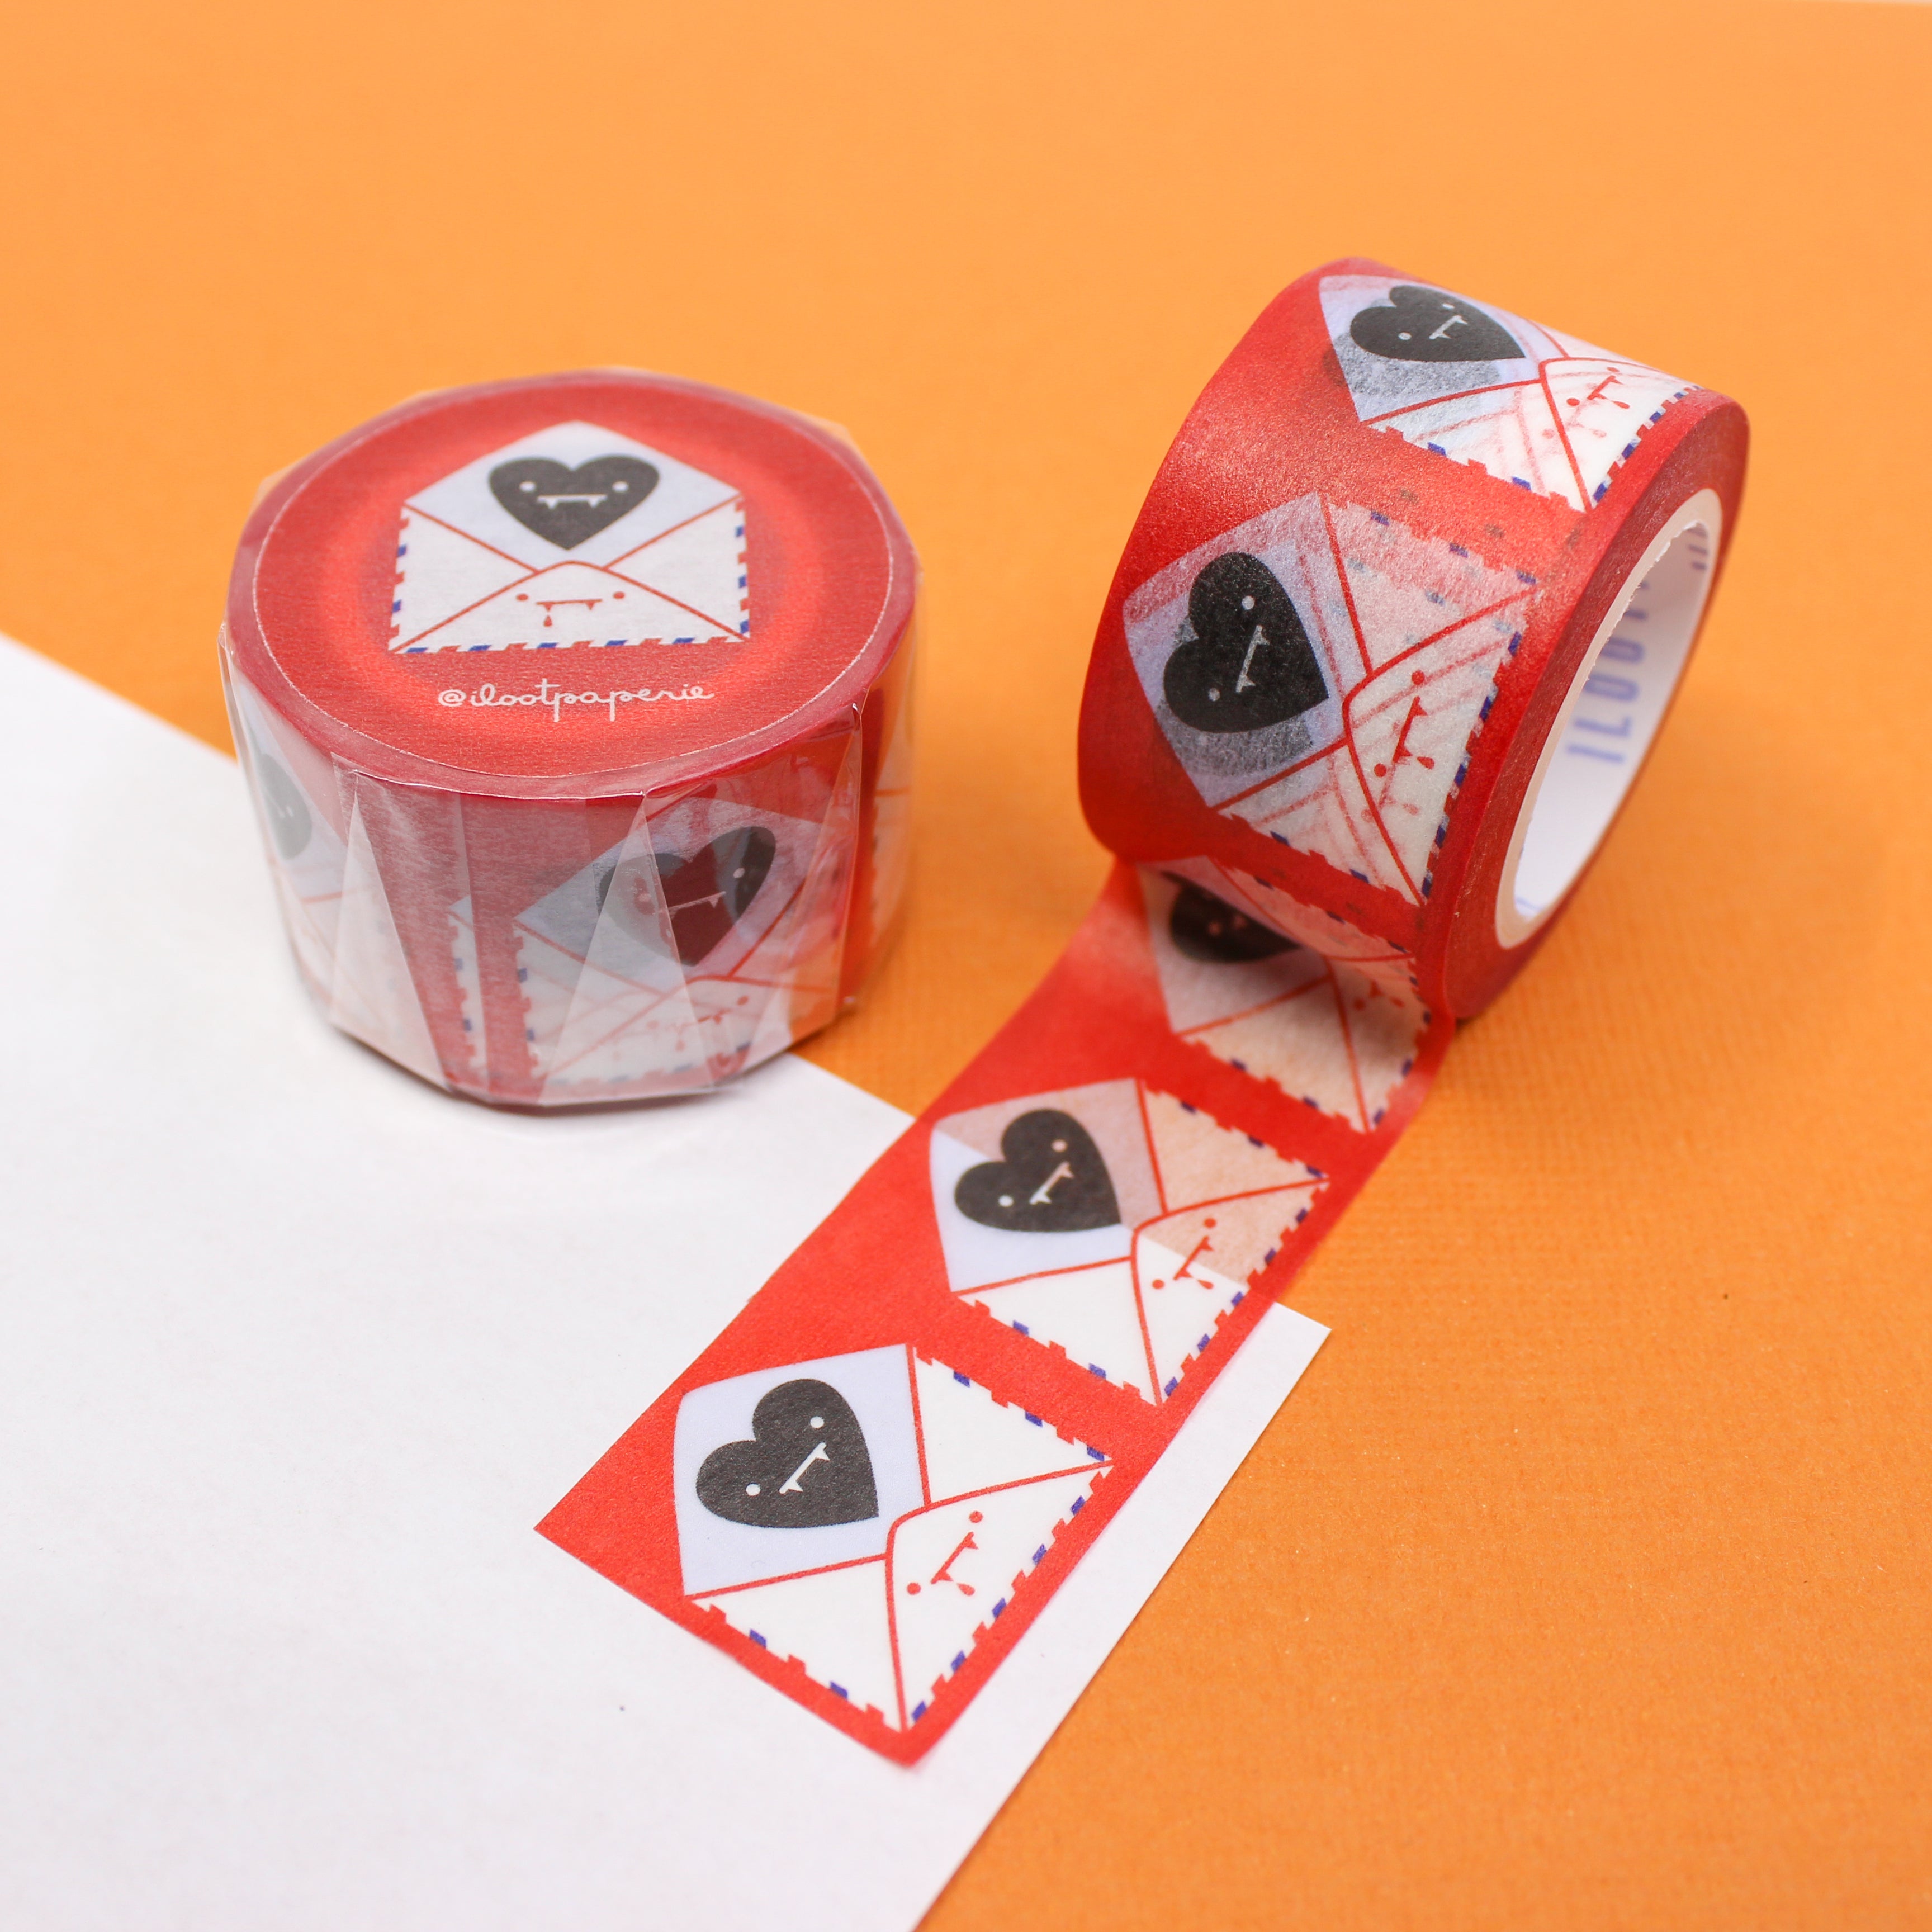 This is a black vampire hearts themed washi tape from BBB Supplies Craft Shop